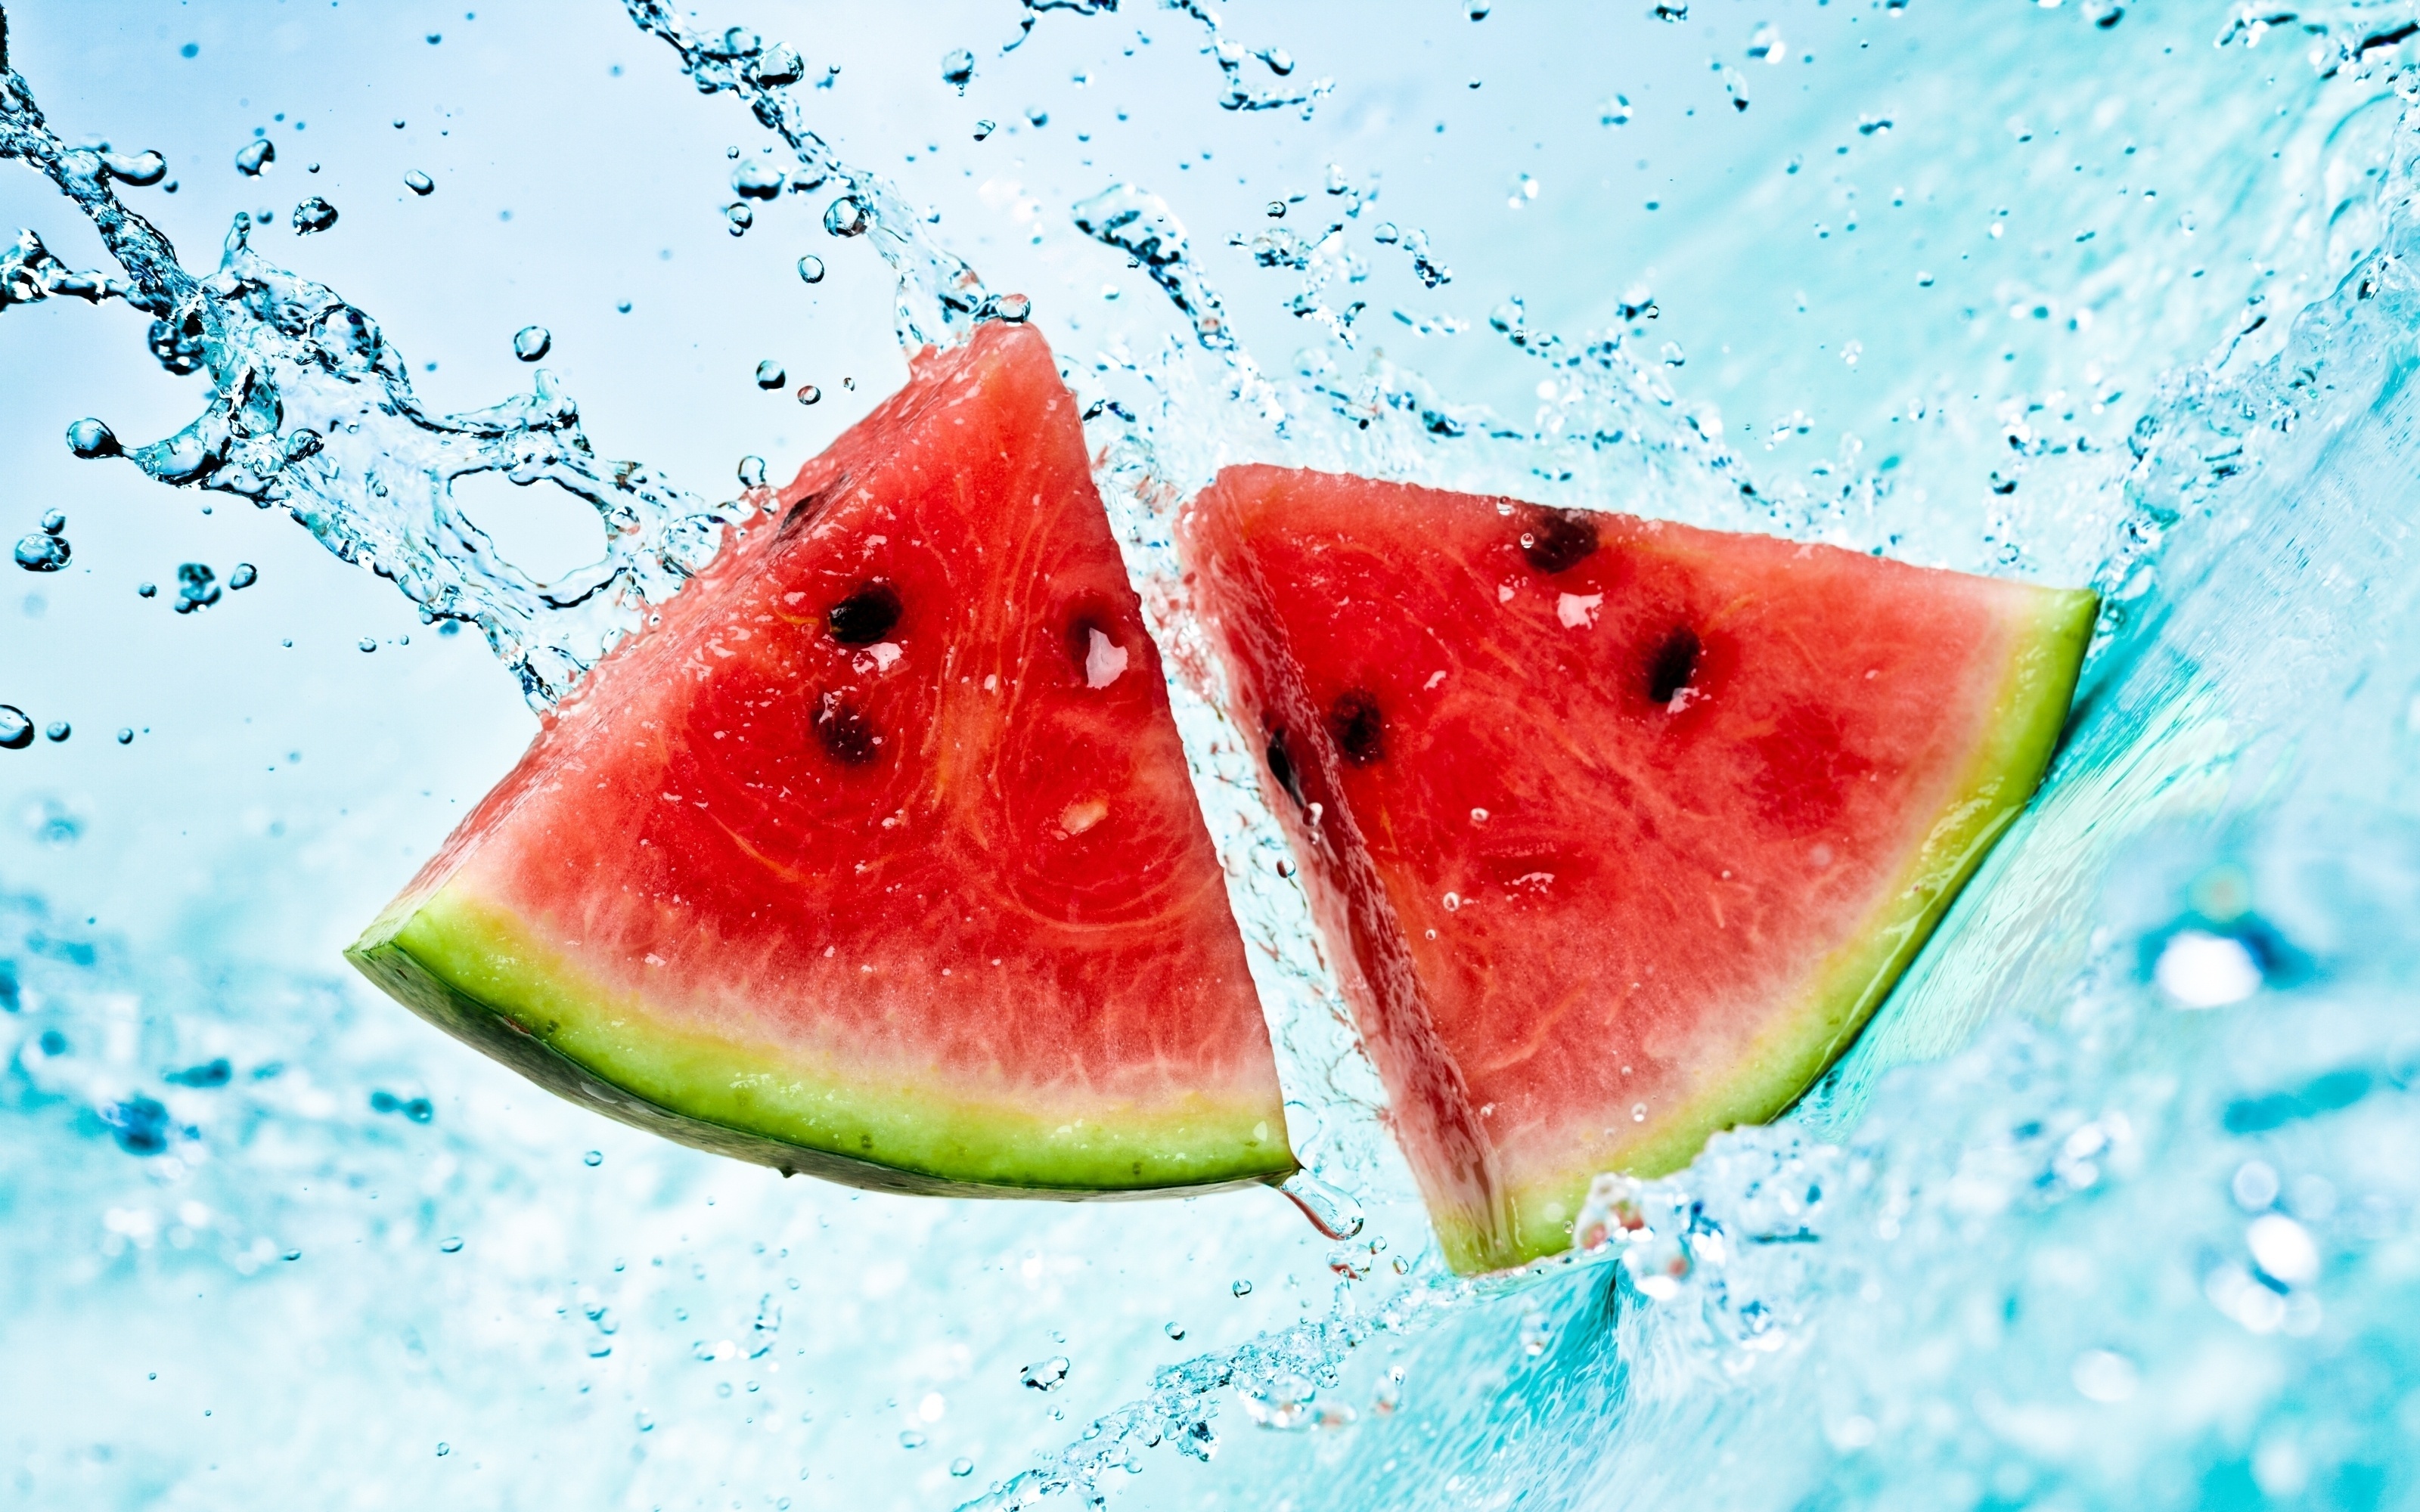 Watermelon Wallpaper Patterns | Free Images at Clker.com - vector clip art  online, royalty free & public domain